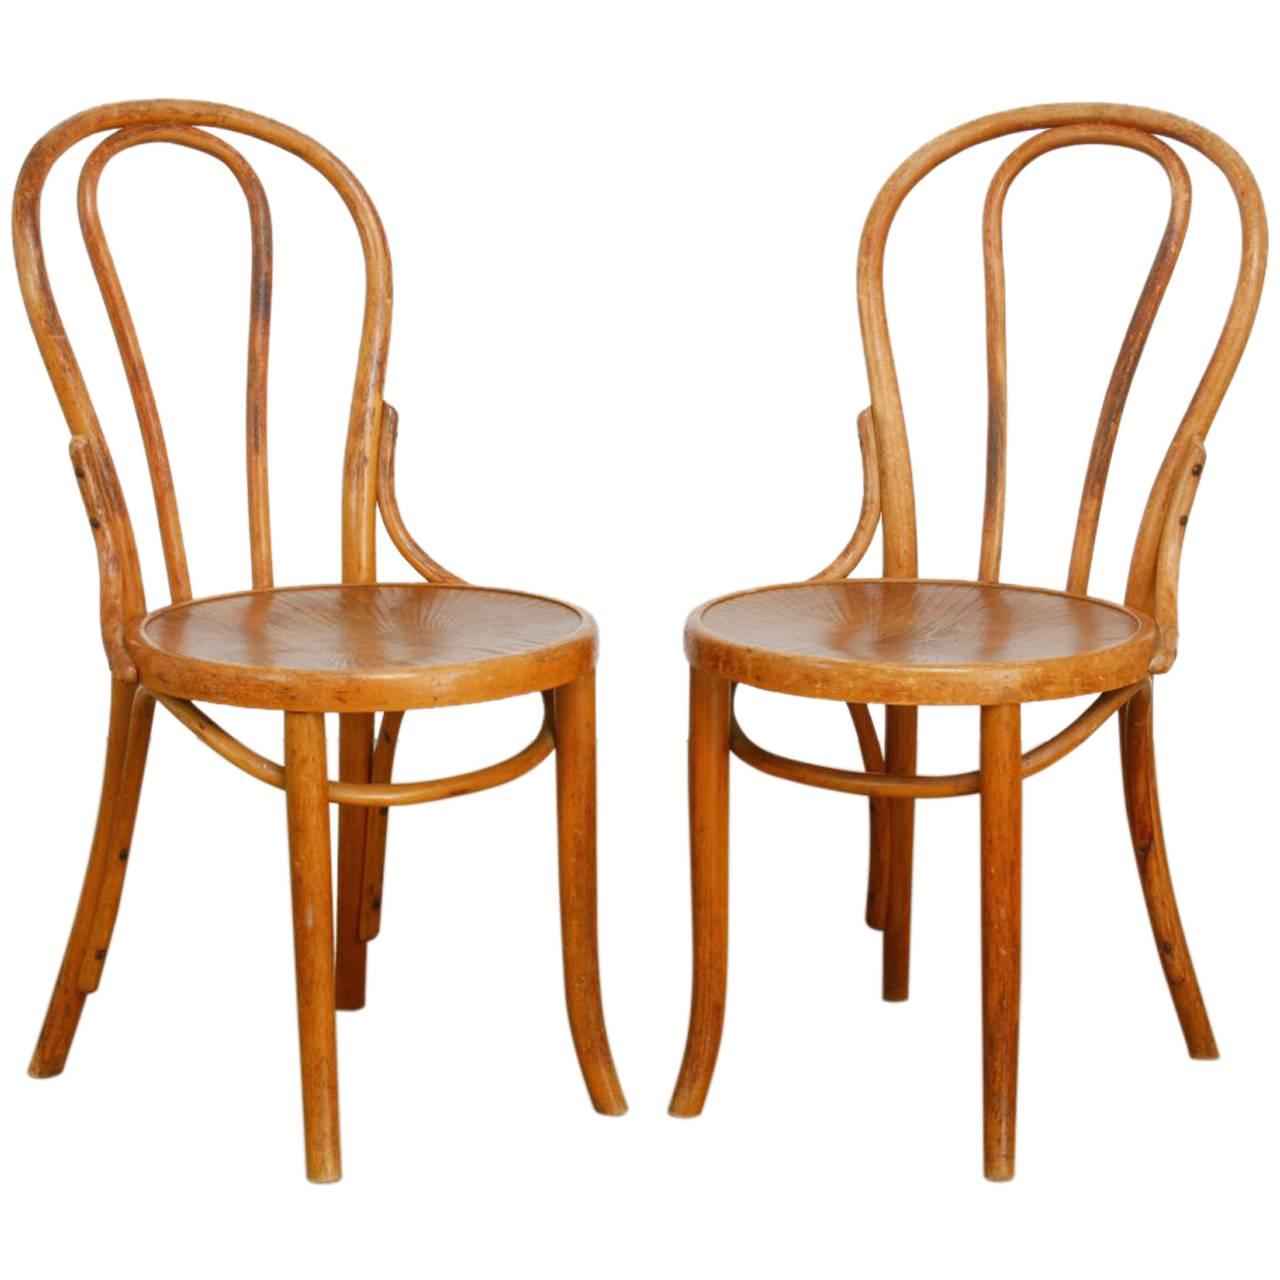 Pair of Michael Thonet No. 18 Bentwood Viennese Cafe Chairs